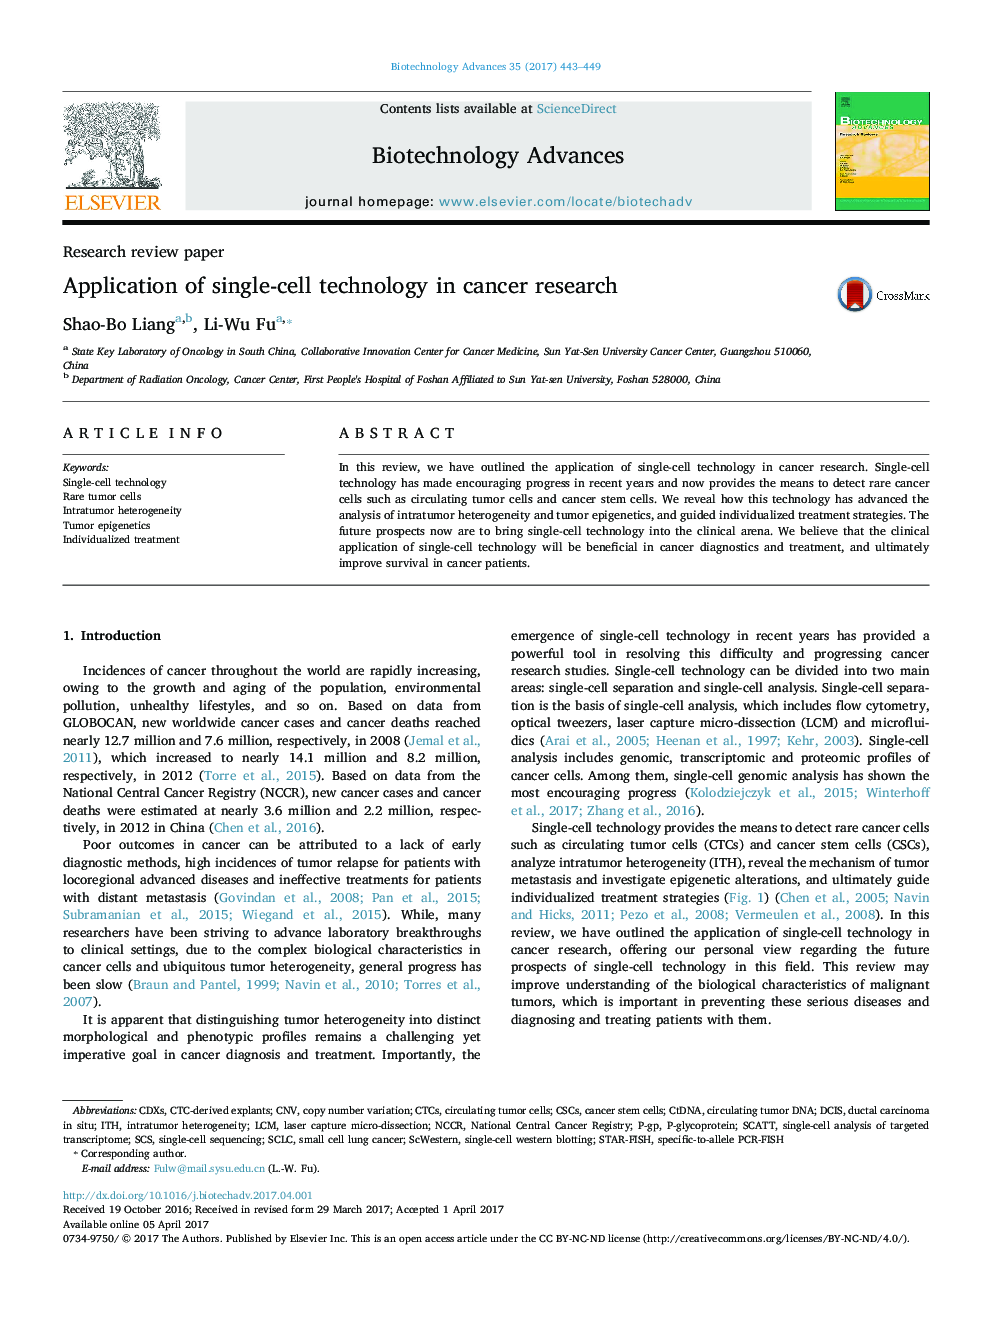 Research review paperApplication of single-cell technology in cancer research